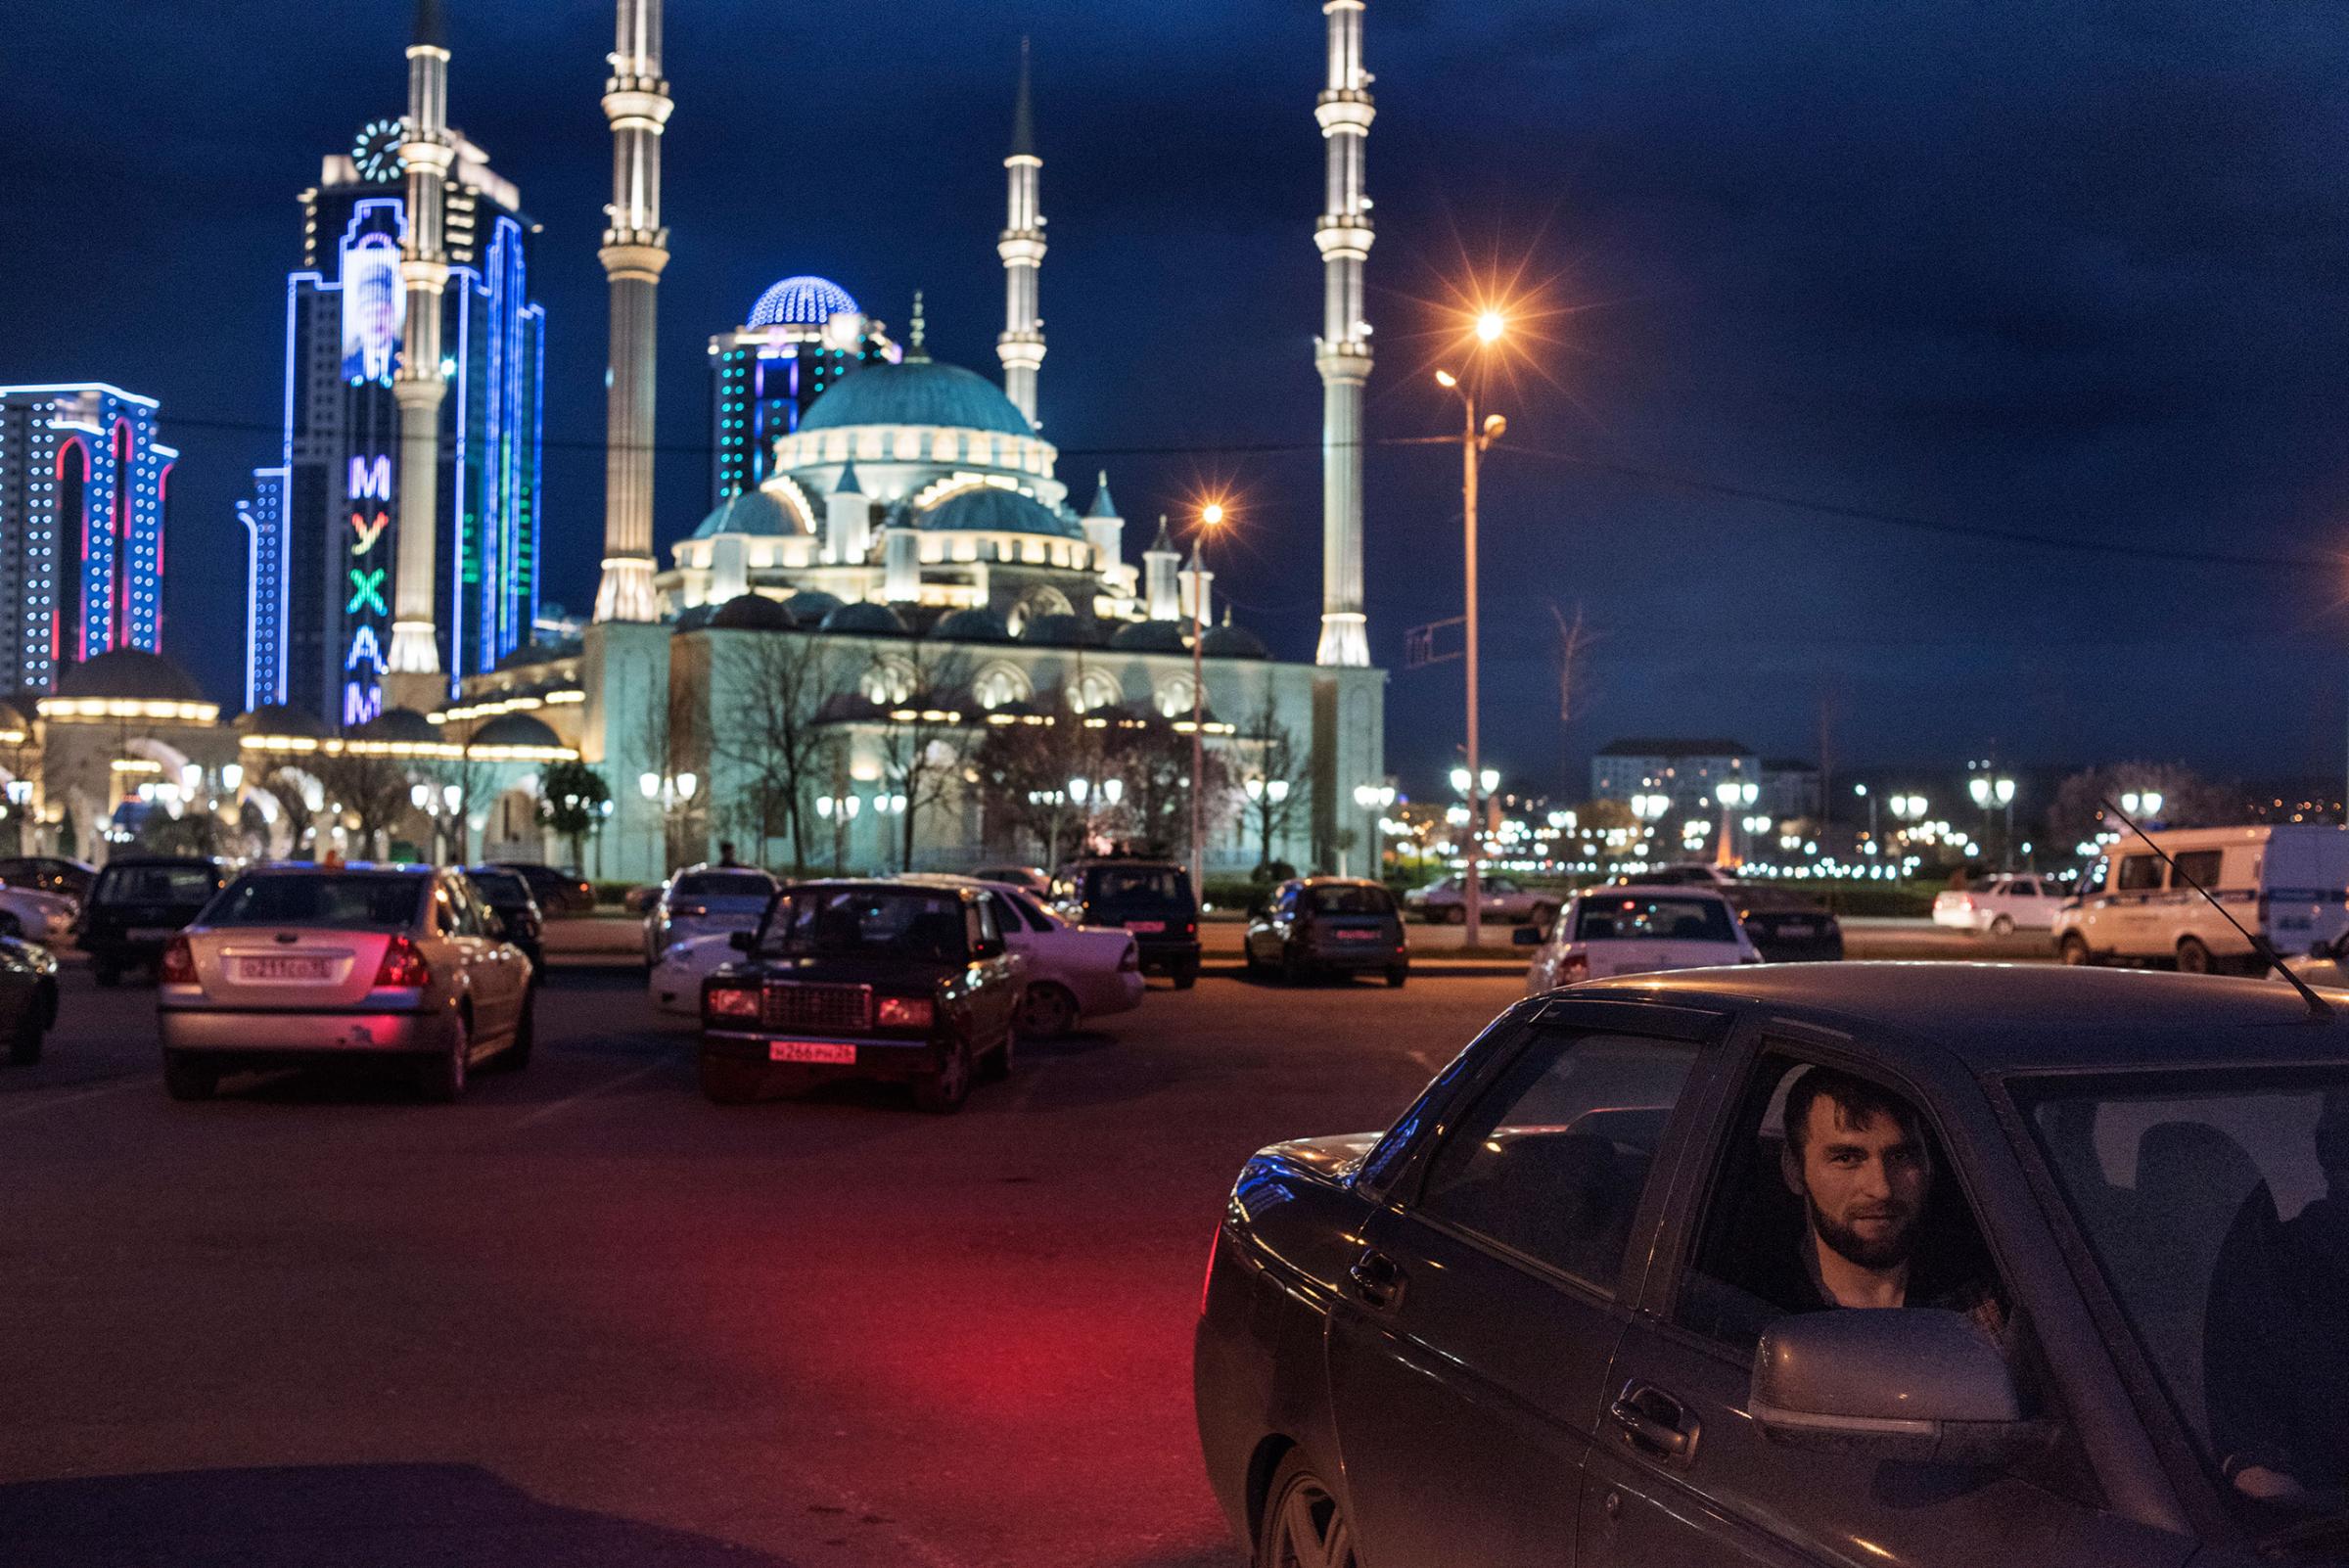 Worshipers leave the evening prayer at the Heart of Chechnya Mosque in Grozny on April 17, 2015.